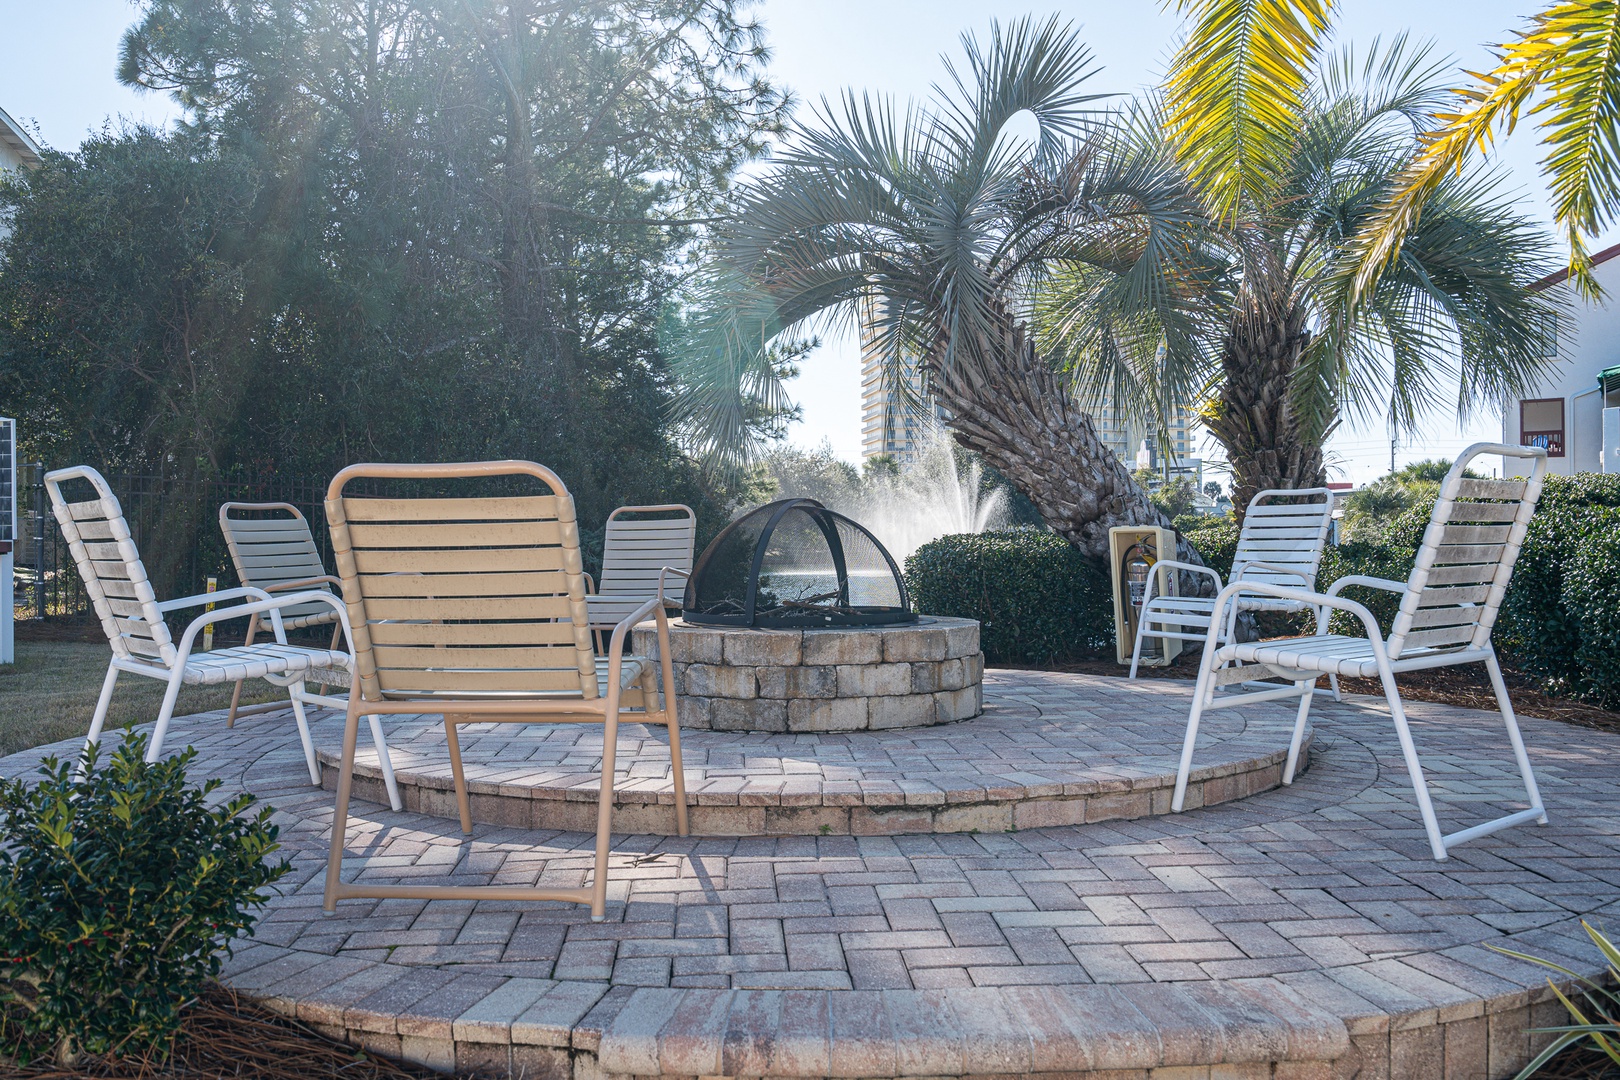 Gather around the community firepit & make memories during your stay